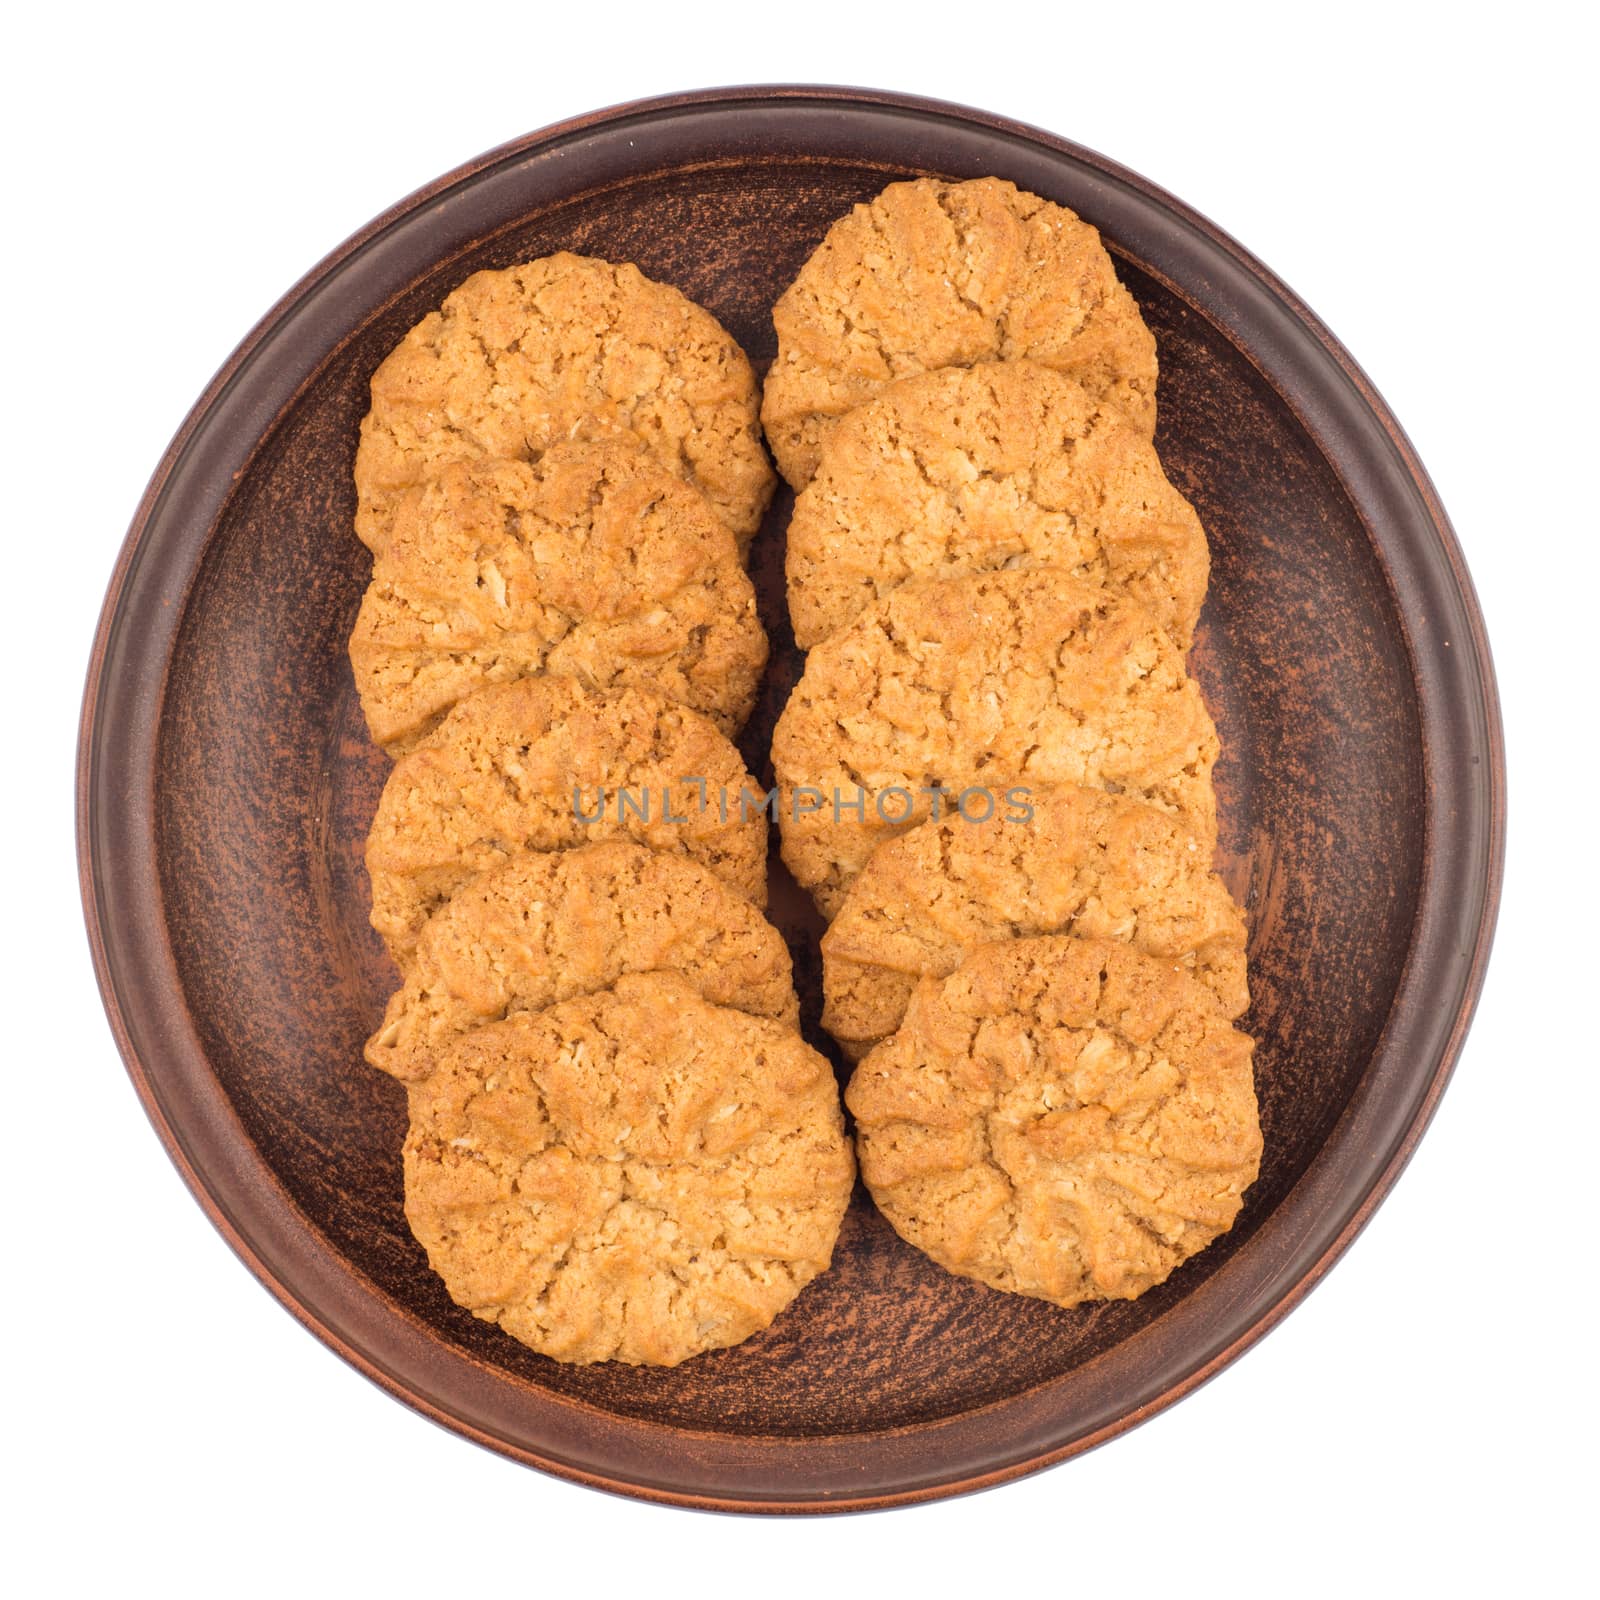 Oatmeal cookies in a brown plate.  by DGolbay